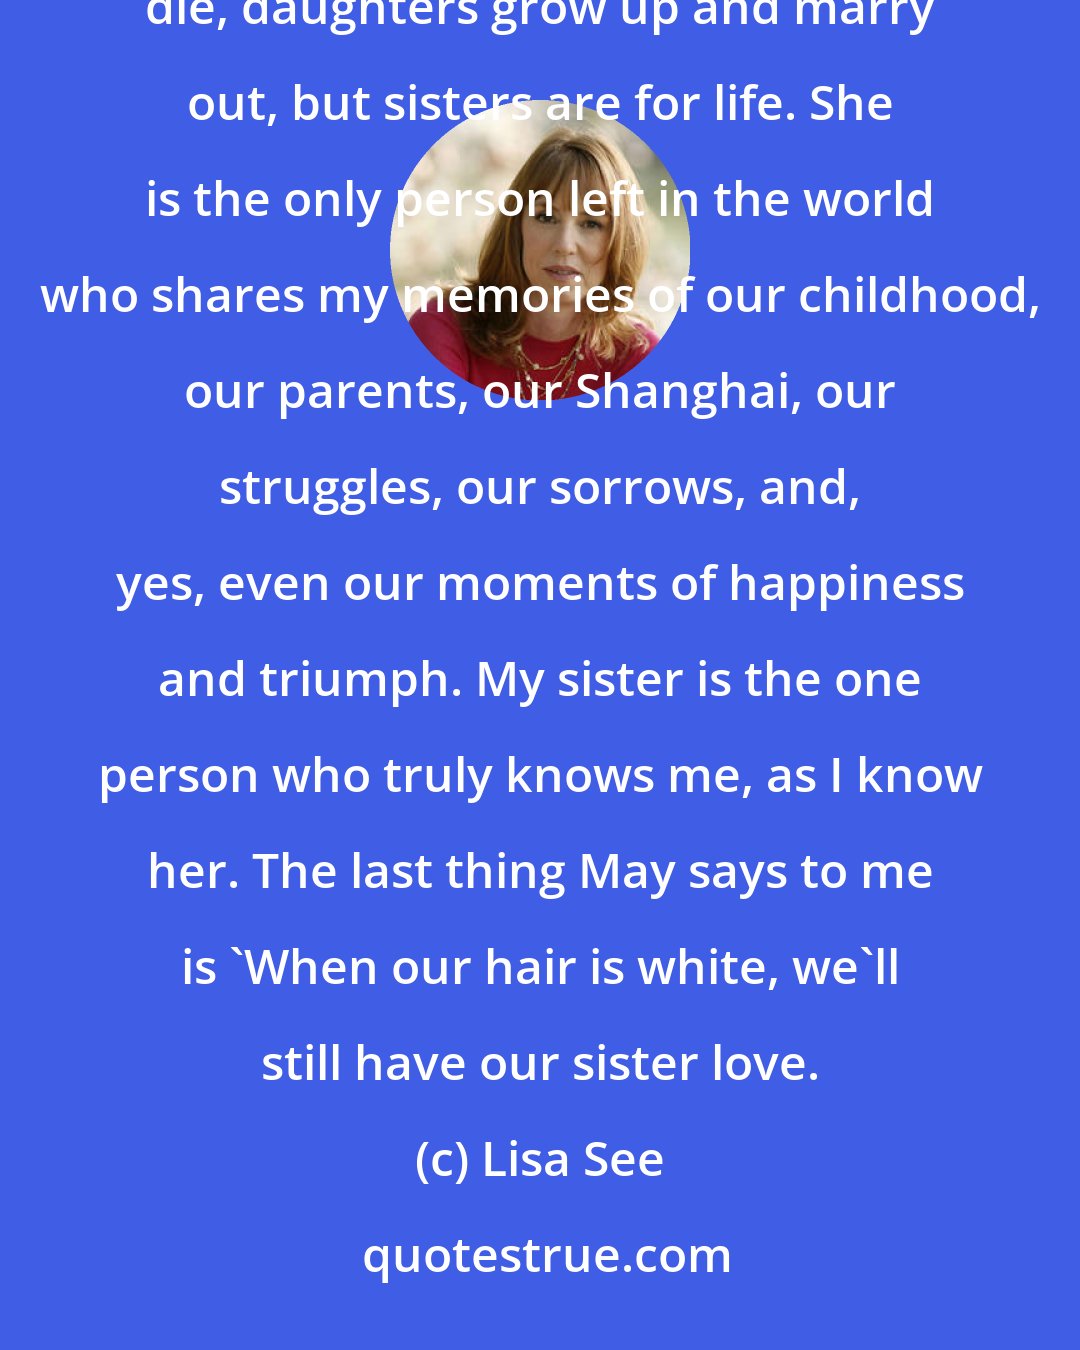 Lisa See: We hug, but there are no tears. For every awful thing that's been said and done, she is my sister. Parents die, daughters grow up and marry out, but sisters are for life. She is the only person left in the world who shares my memories of our childhood, our parents, our Shanghai, our struggles, our sorrows, and, yes, even our moments of happiness and triumph. My sister is the one person who truly knows me, as I know her. The last thing May says to me is 'When our hair is white, we'll still have our sister love.